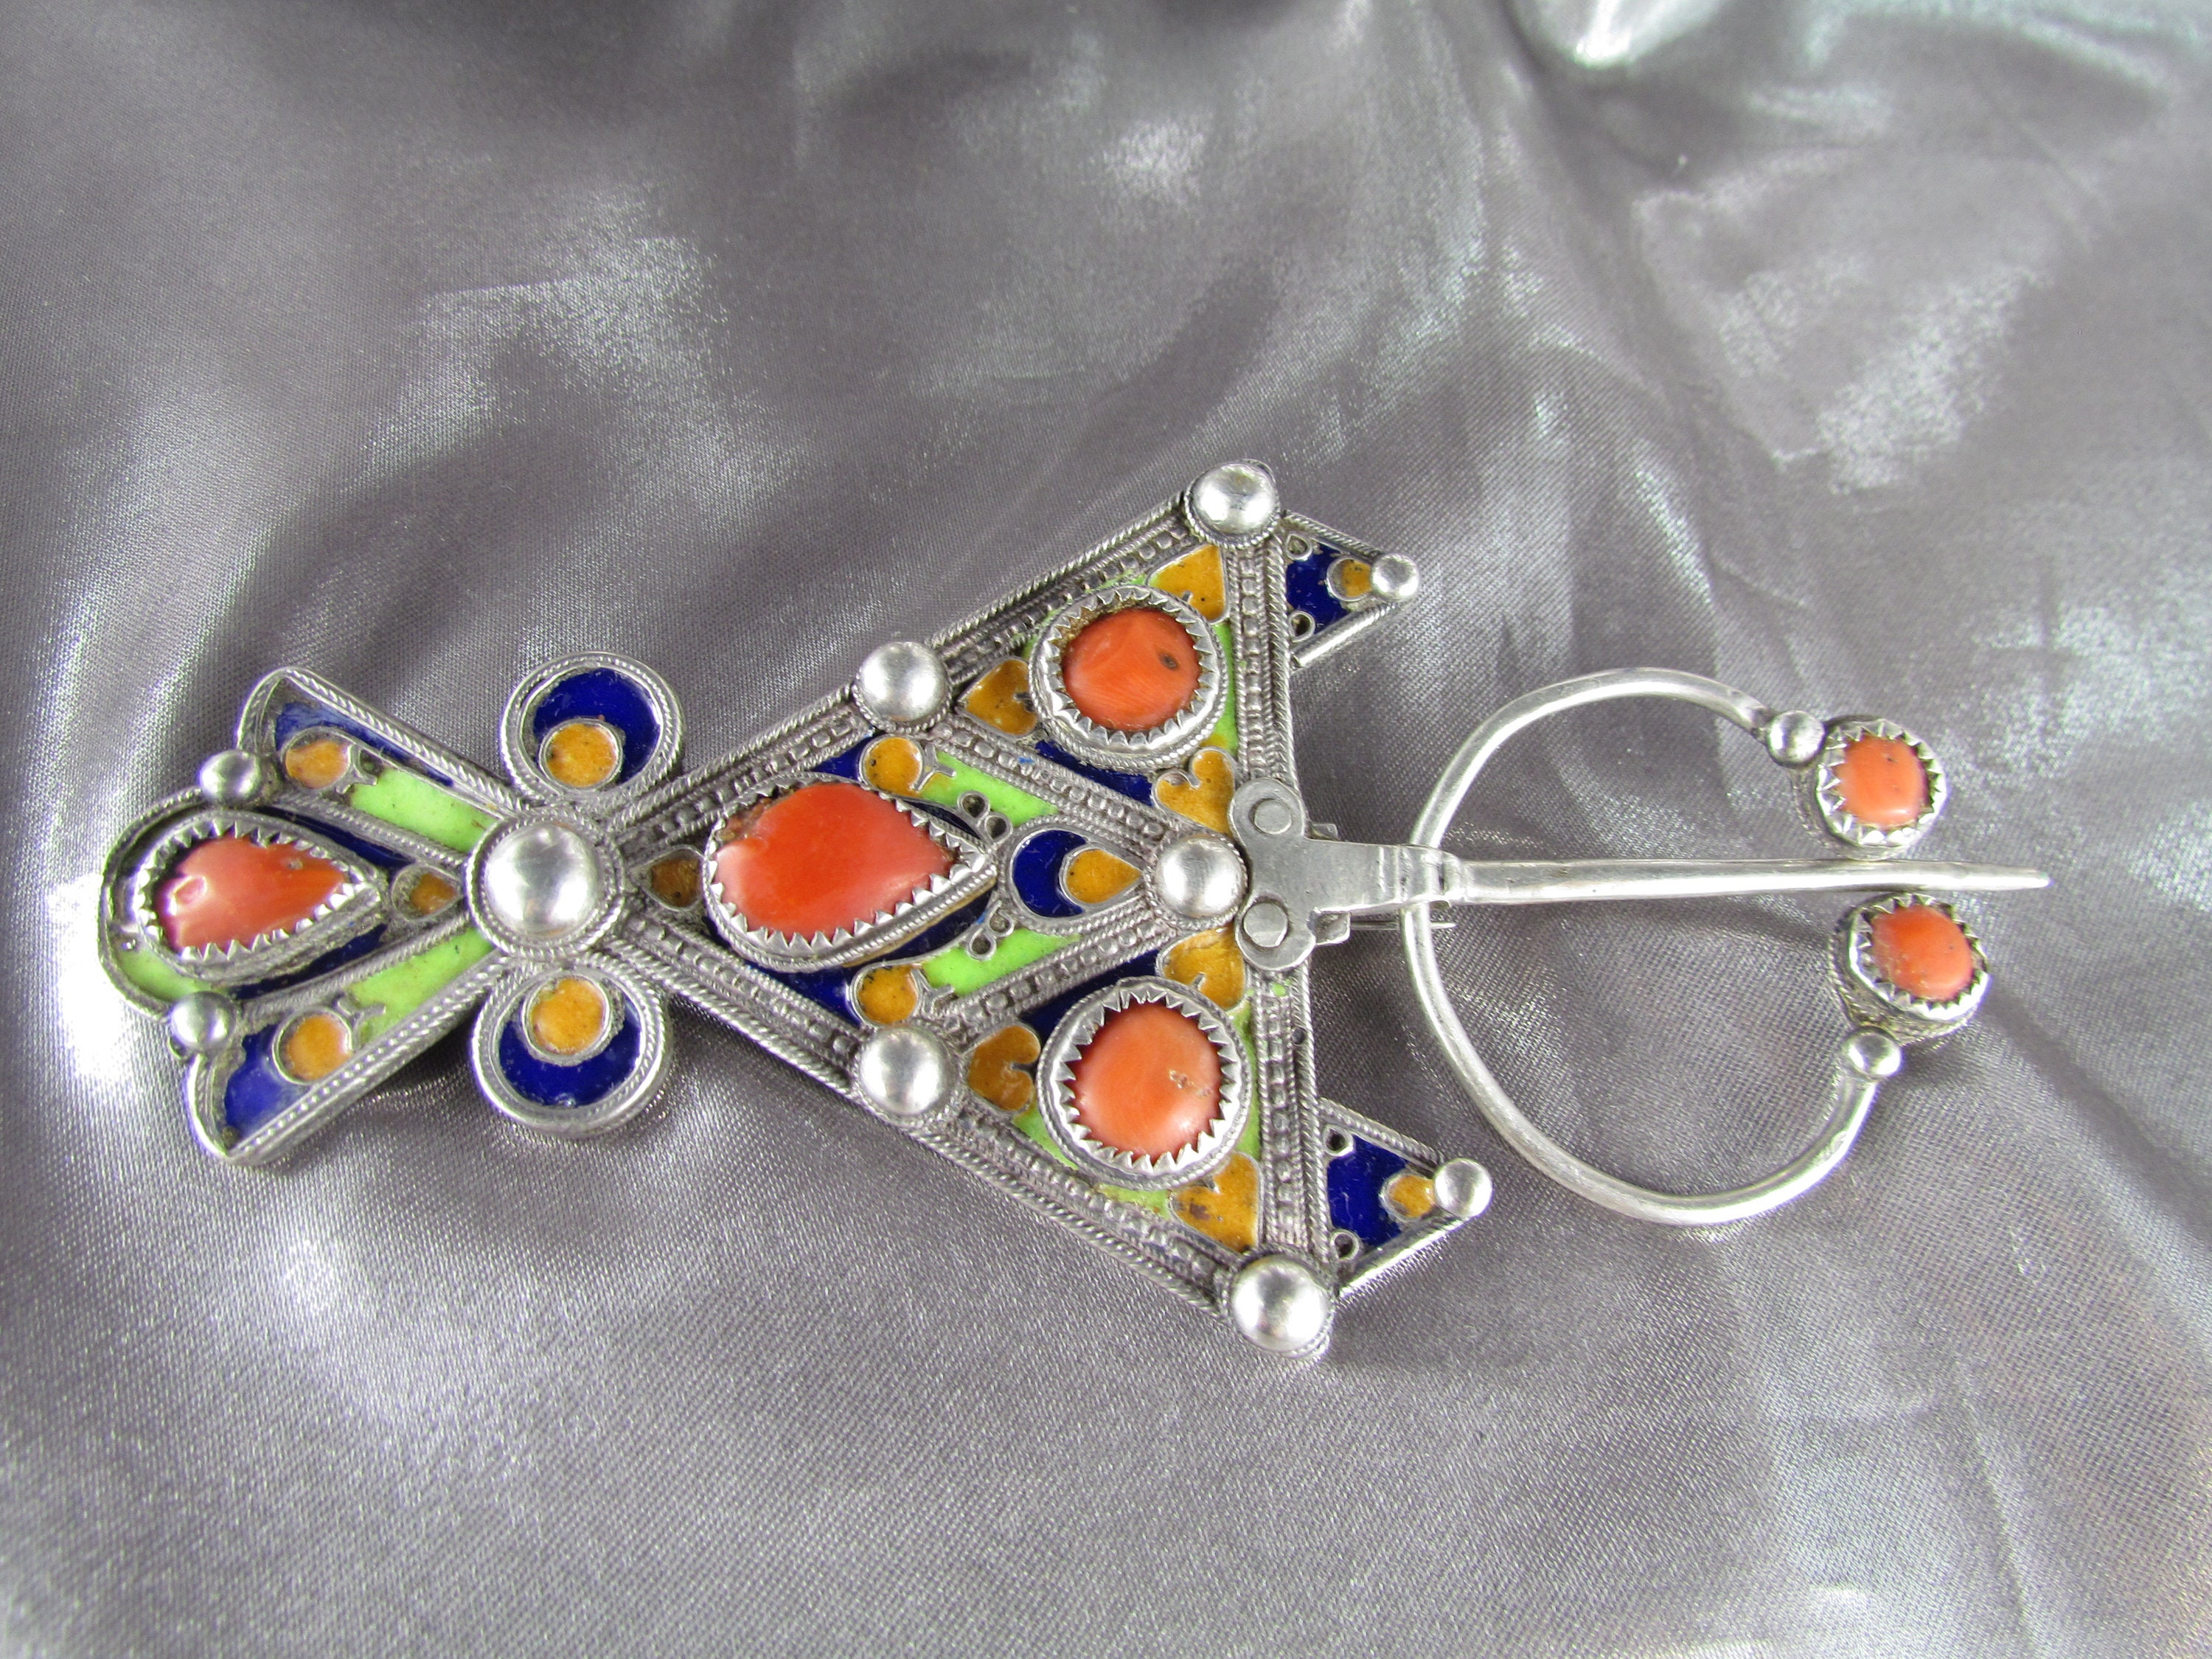 Kabyle Jewellery pic pic